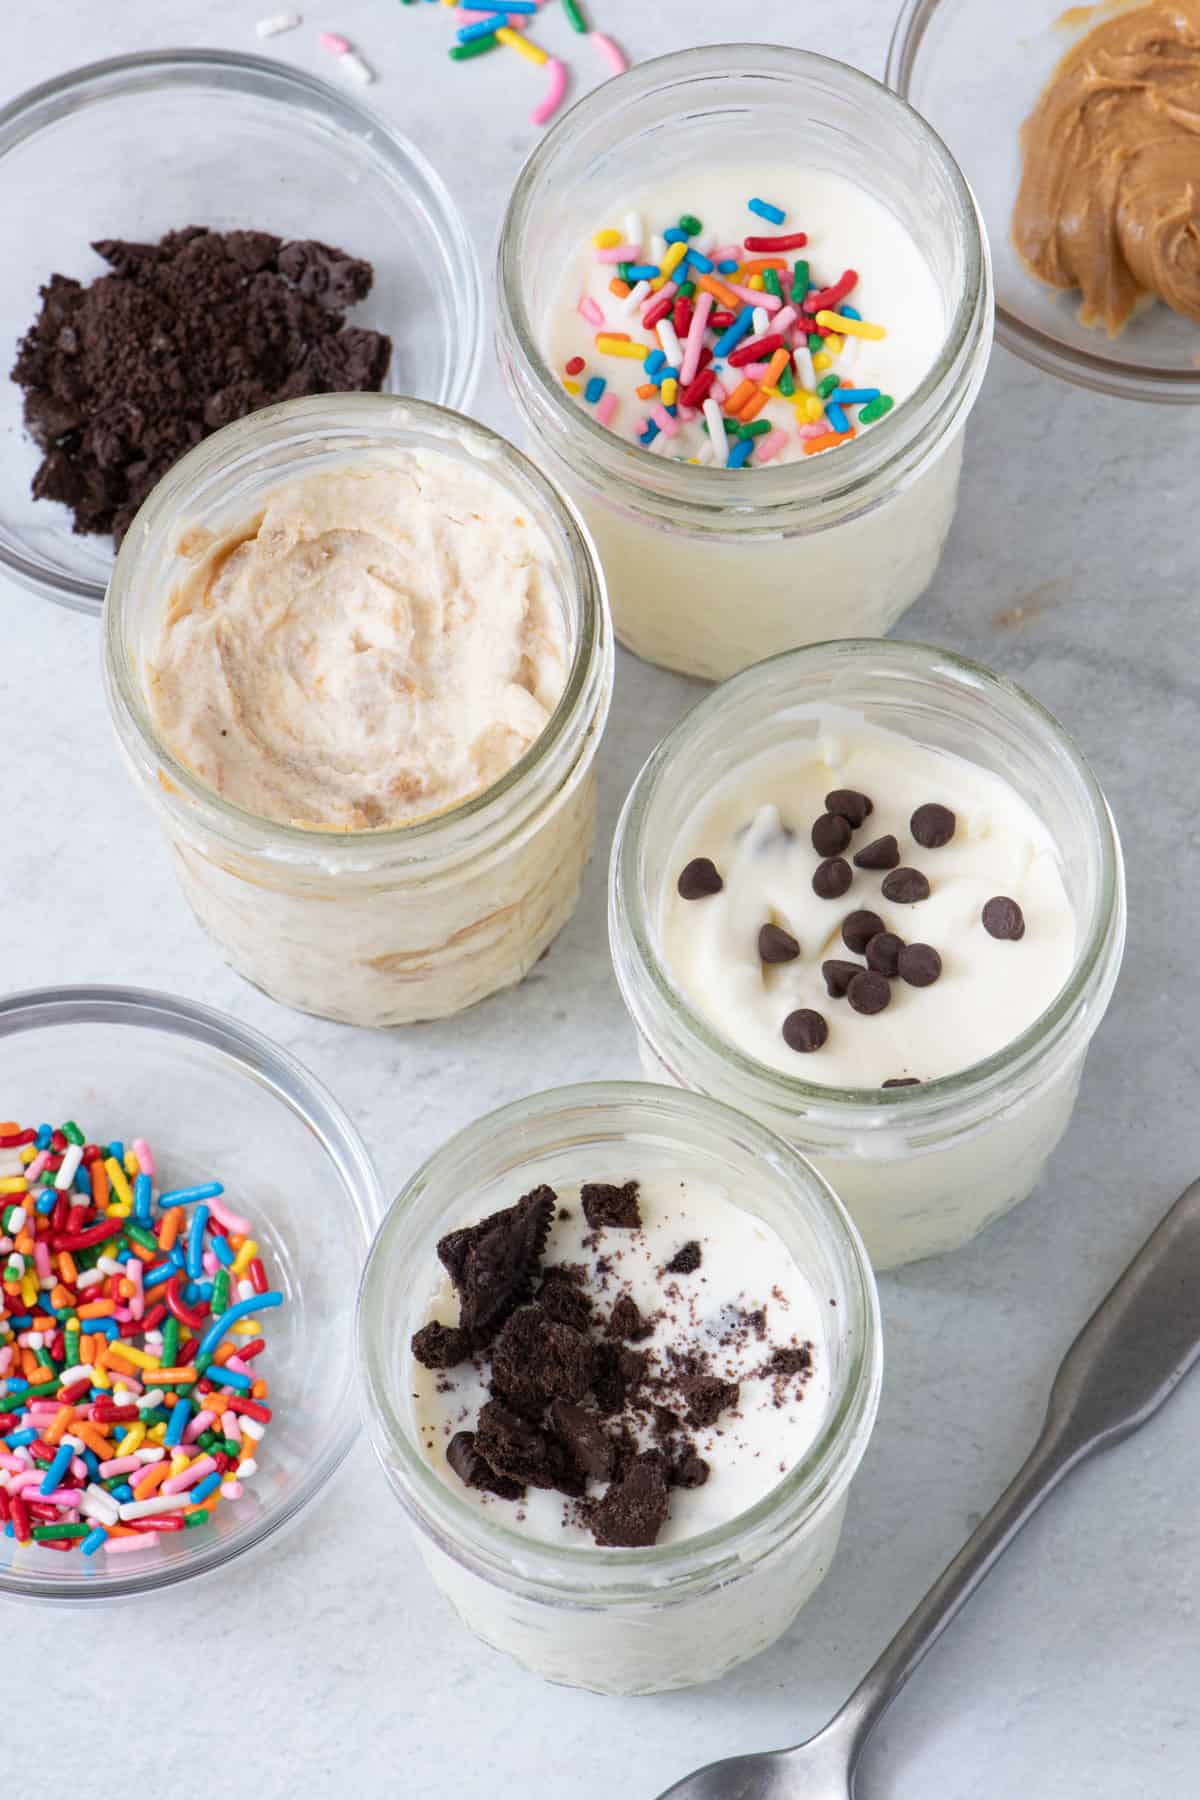 Angle view of 4 masons jars filled with ice cream and each with different toppings inside and in individual bowls placed around jars.